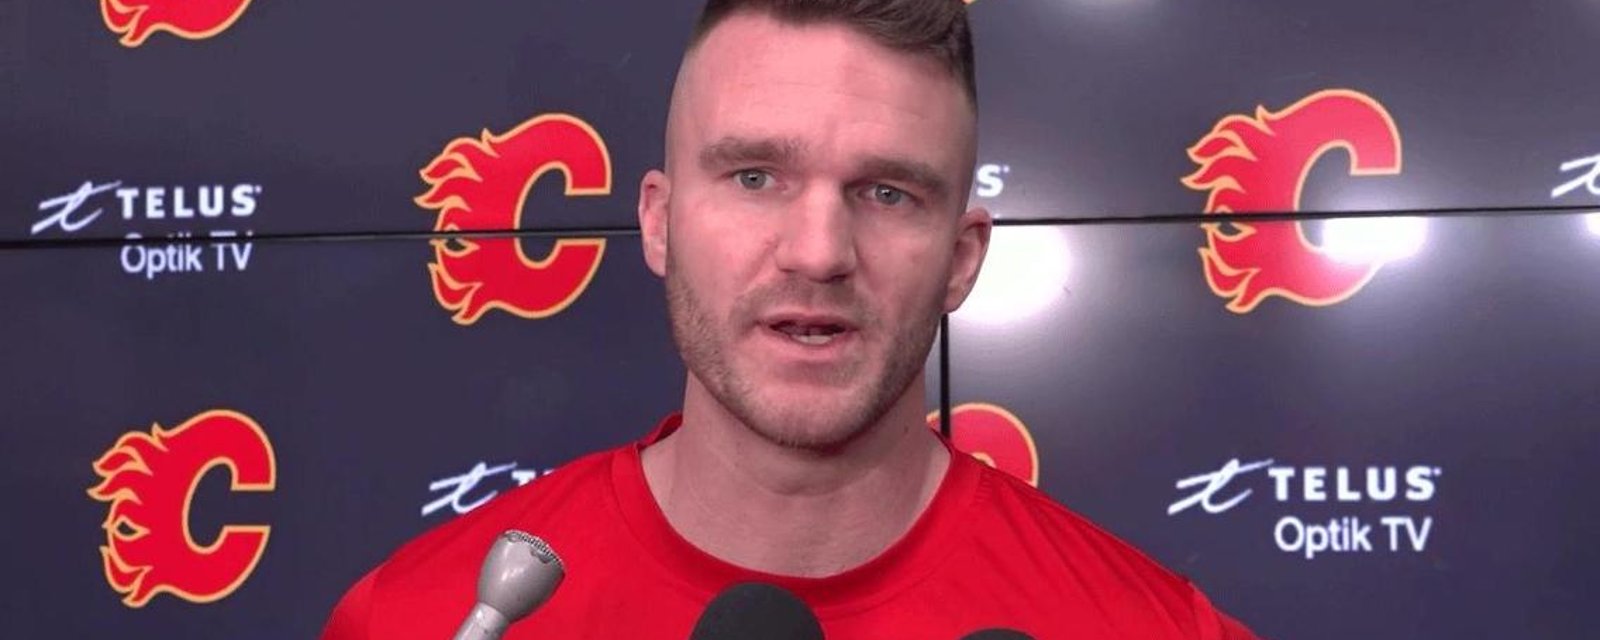 Jonathan Huberdeau exposes issue, “might see a psychologist”